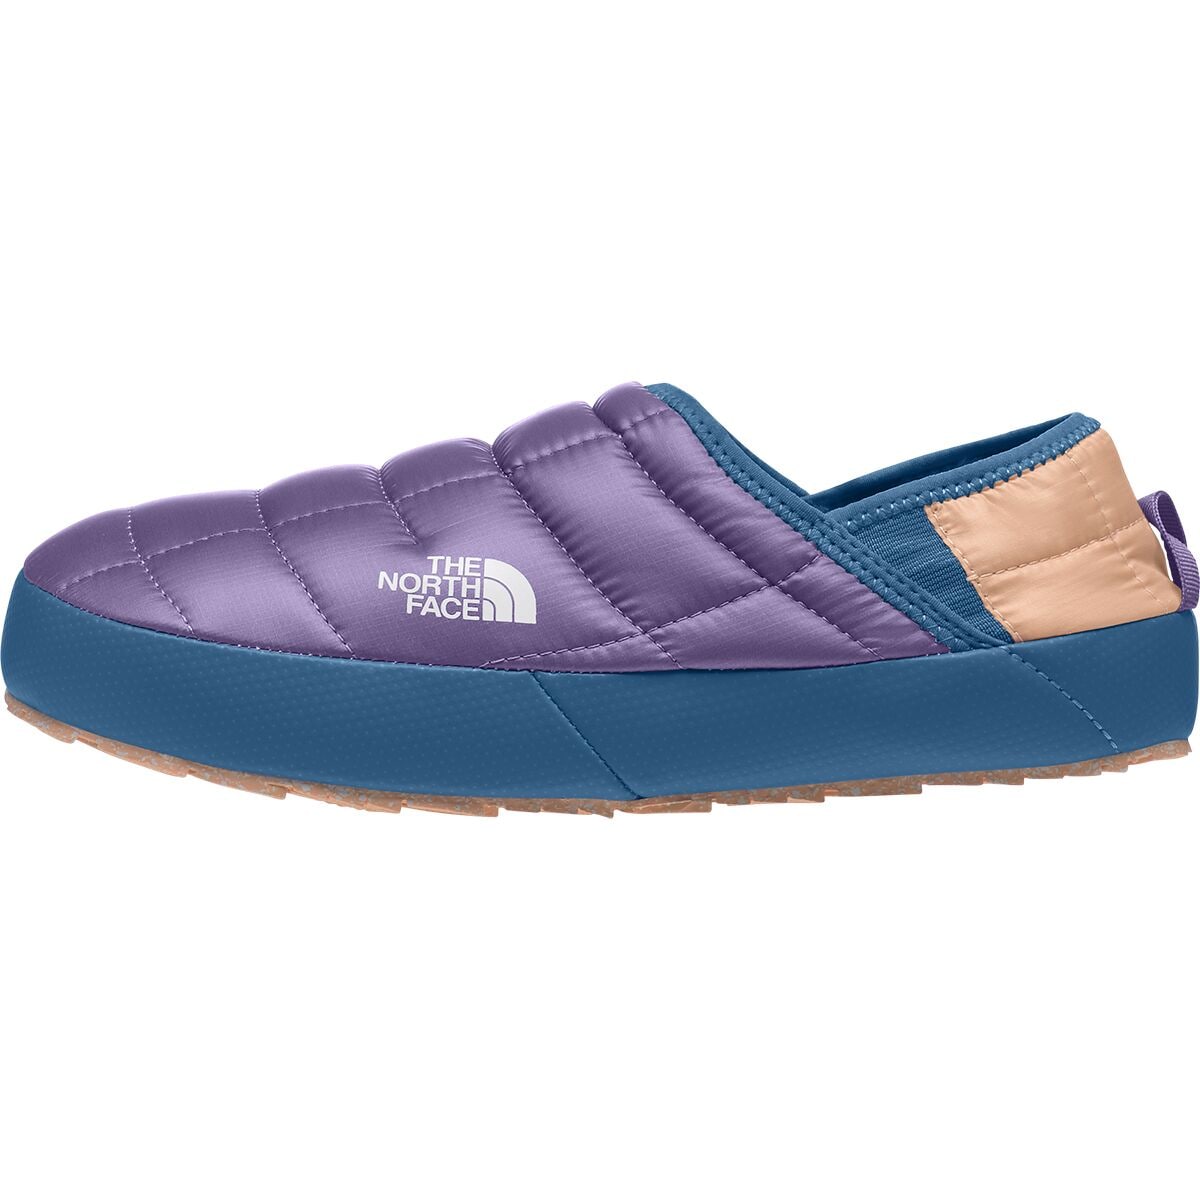 Thermoball Traction Mule V Shoe - Women